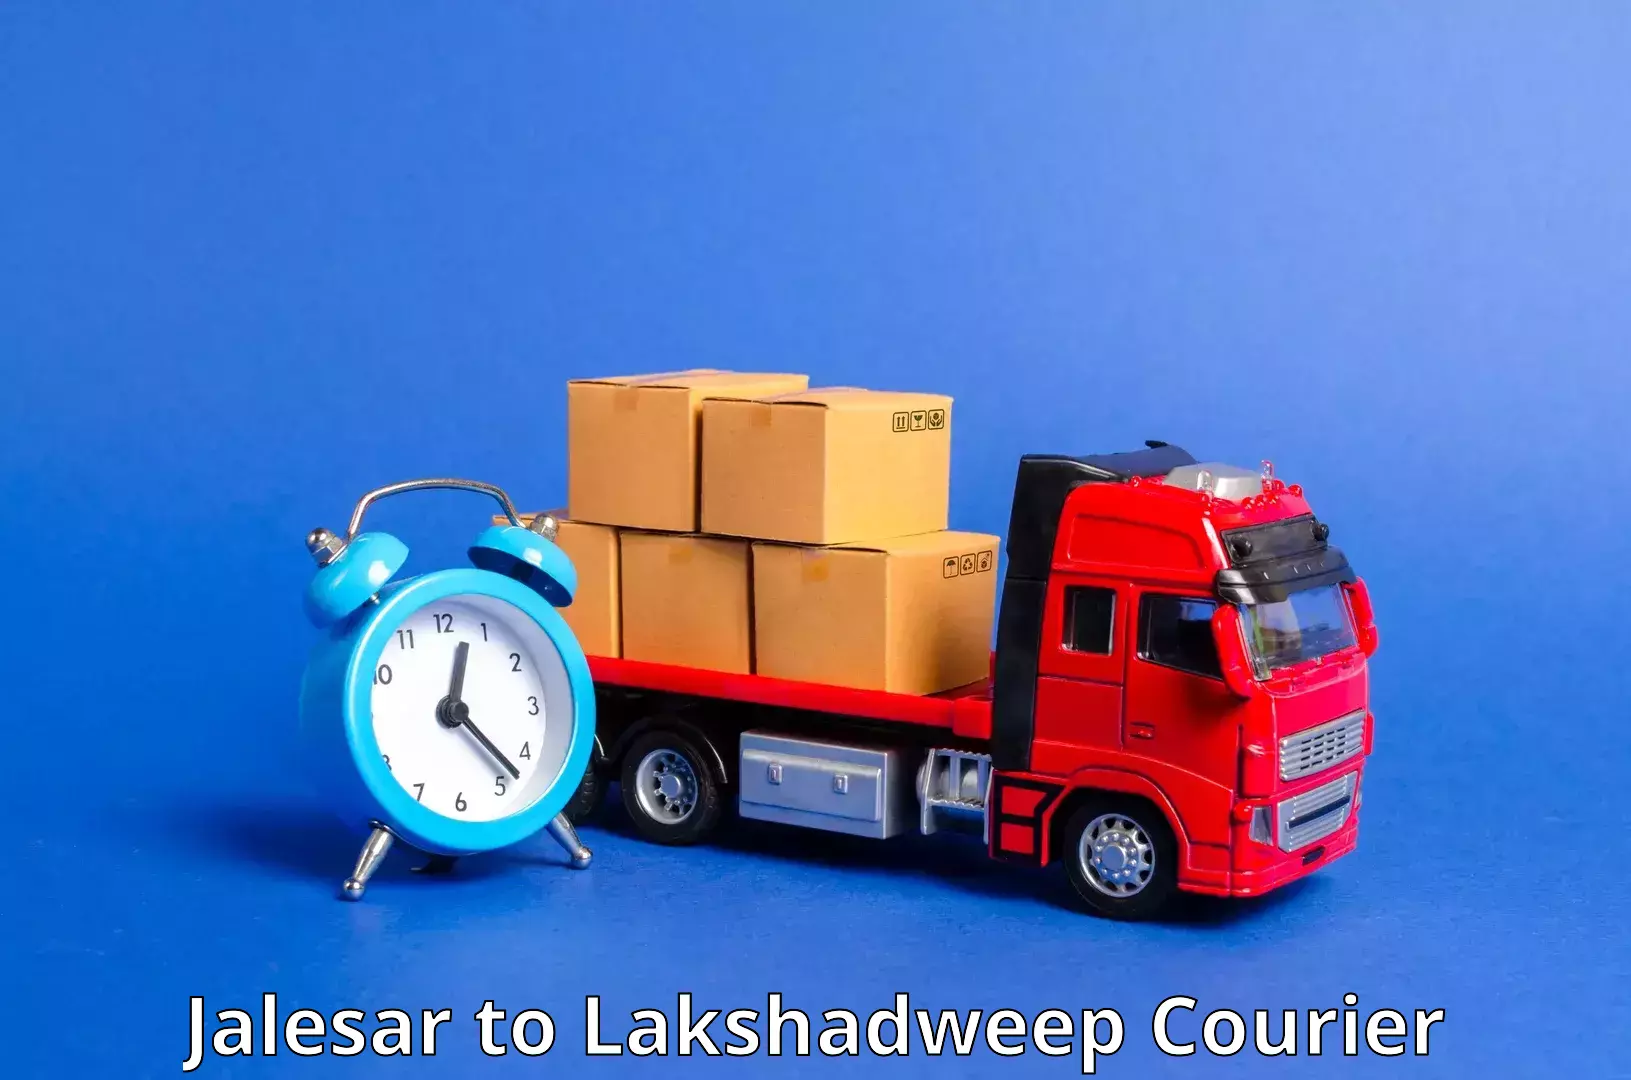 Courier service innovation Jalesar to Lakshadweep